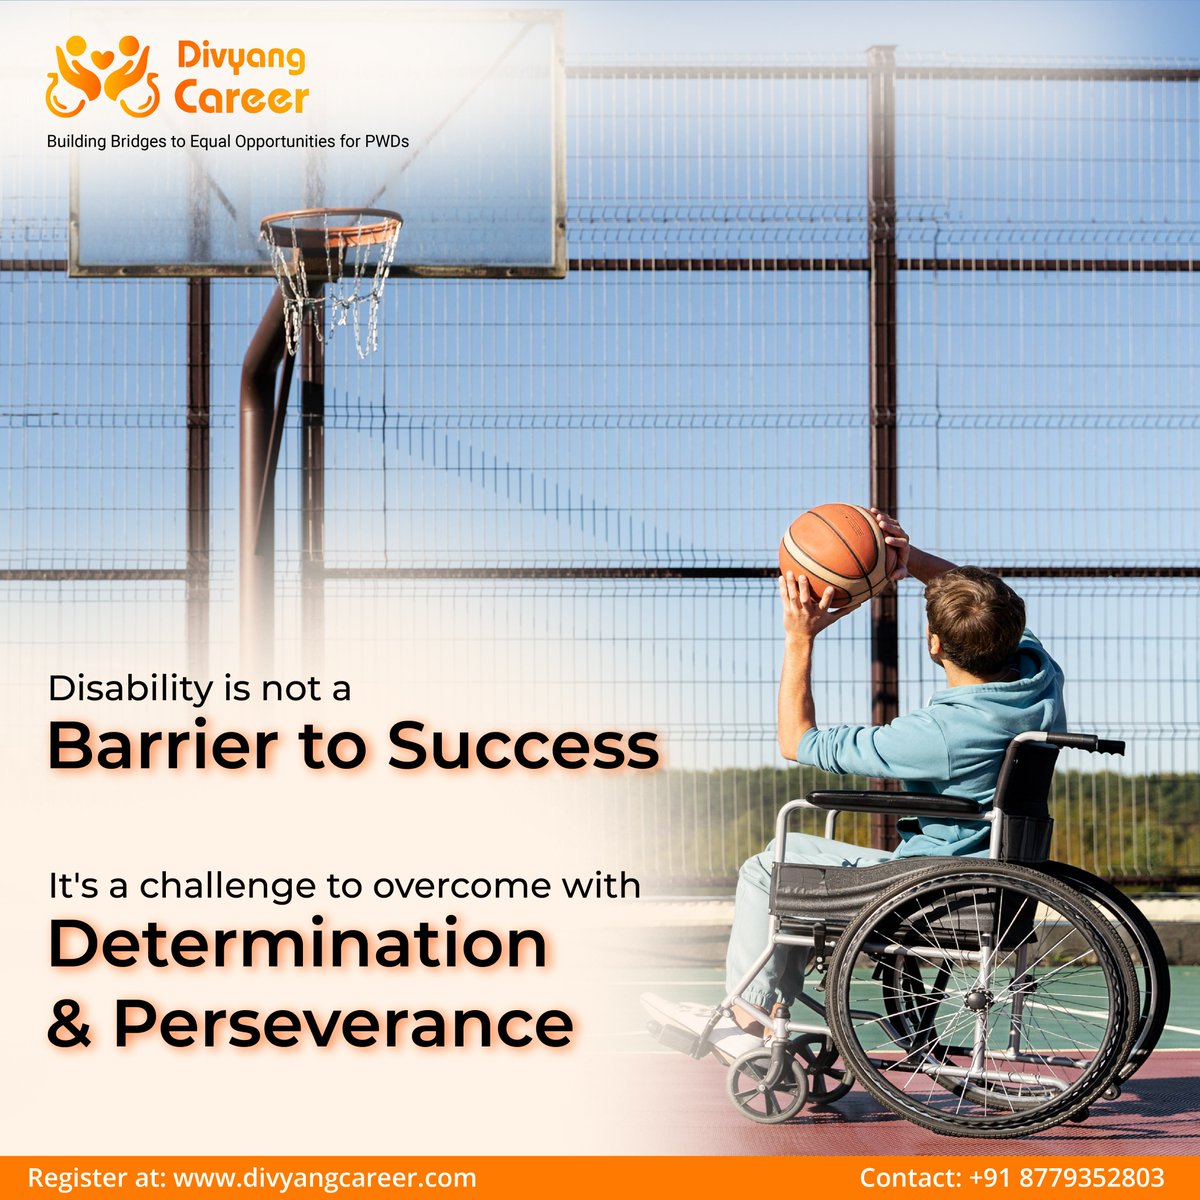 Disability is a part of diversity, and diversity is our strength. Let's support each other on the road to success! 
#pwdjobs #empowercarrer #careerjobs #jobseekers #unemployees #CareerGoals #careeropportunities #success #jointhecommunity #careergrowt #talent #PWD #divyangcareer